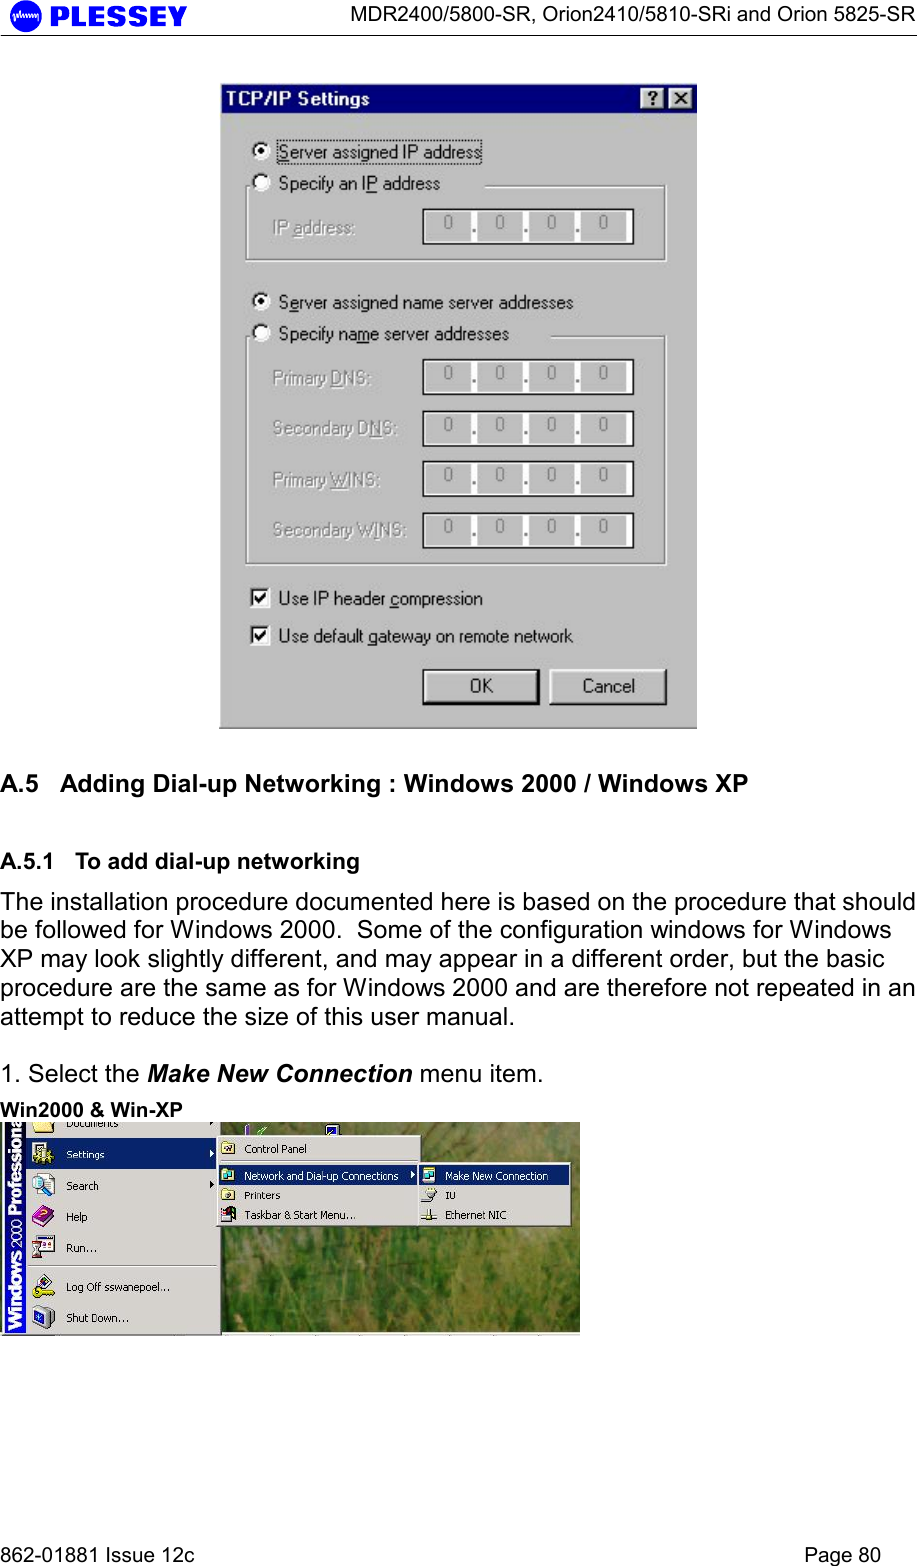      MDR2400/5800-SR, Orion2410/5810-SRi and Orion 5825-SR   862-01881 Issue 12c    Page 80   A.5  Adding Dial-up Networking : Windows 2000 / Windows XP A.5.1  To add dial-up networking The installation procedure documented here is based on the procedure that should be followed for Windows 2000.  Some of the configuration windows for Windows XP may look slightly different, and may appear in a different order, but the basic procedure are the same as for Windows 2000 and are therefore not repeated in an attempt to reduce the size of this user manual.  1. Select the Make New Connection menu item. Win2000 &amp; Win-XP  